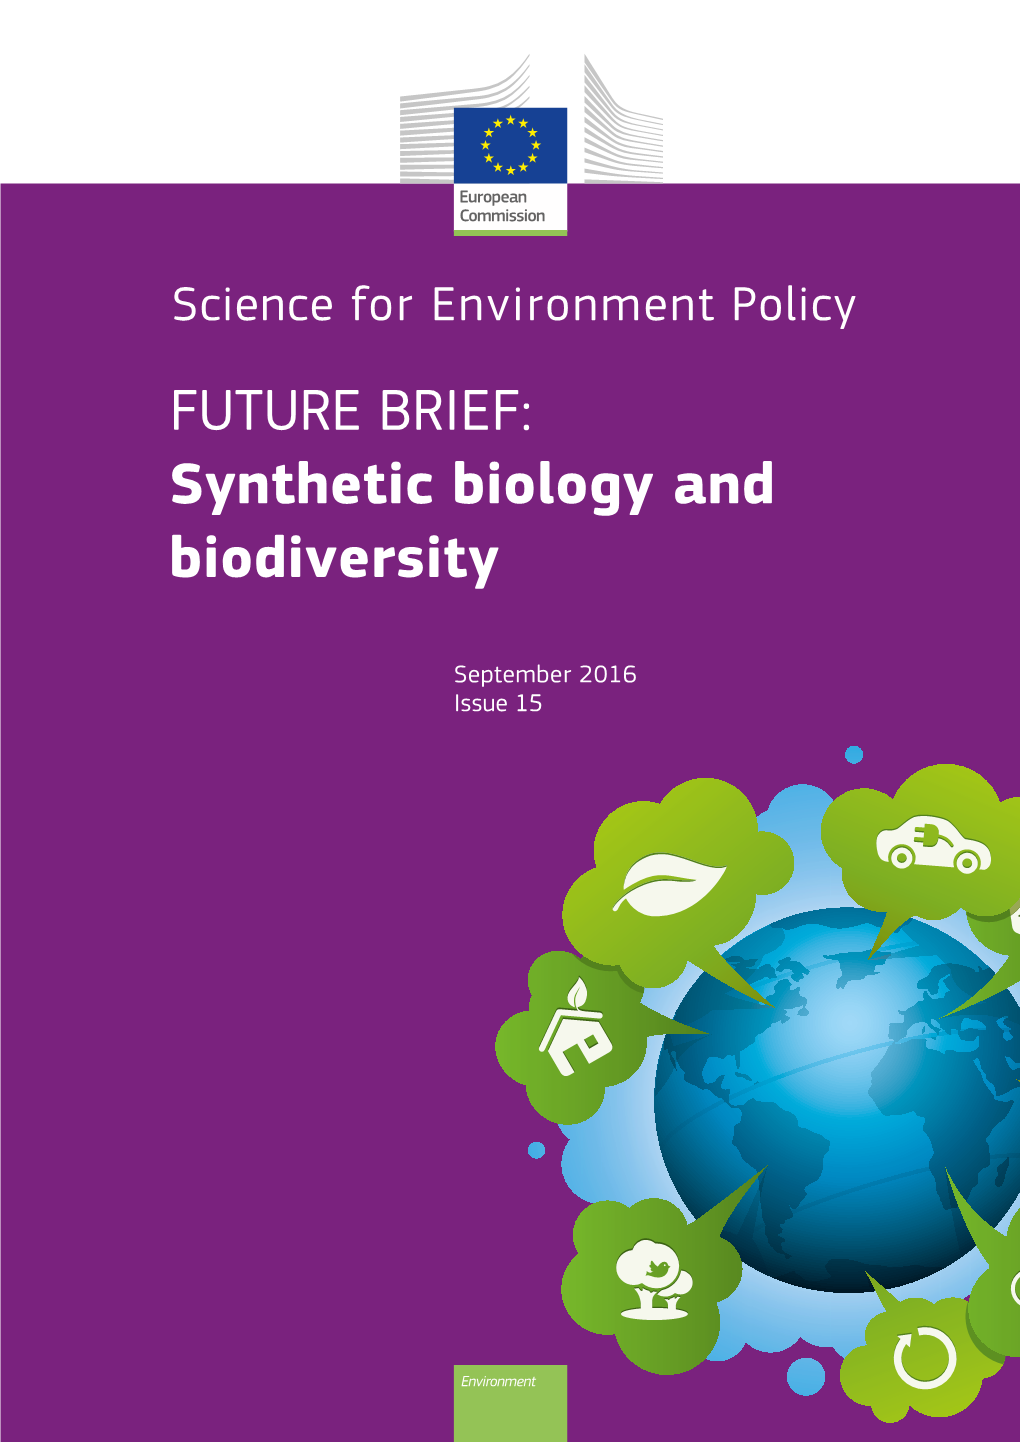 FUTURE BRIEF: Synthetic Biology and Biodiversity